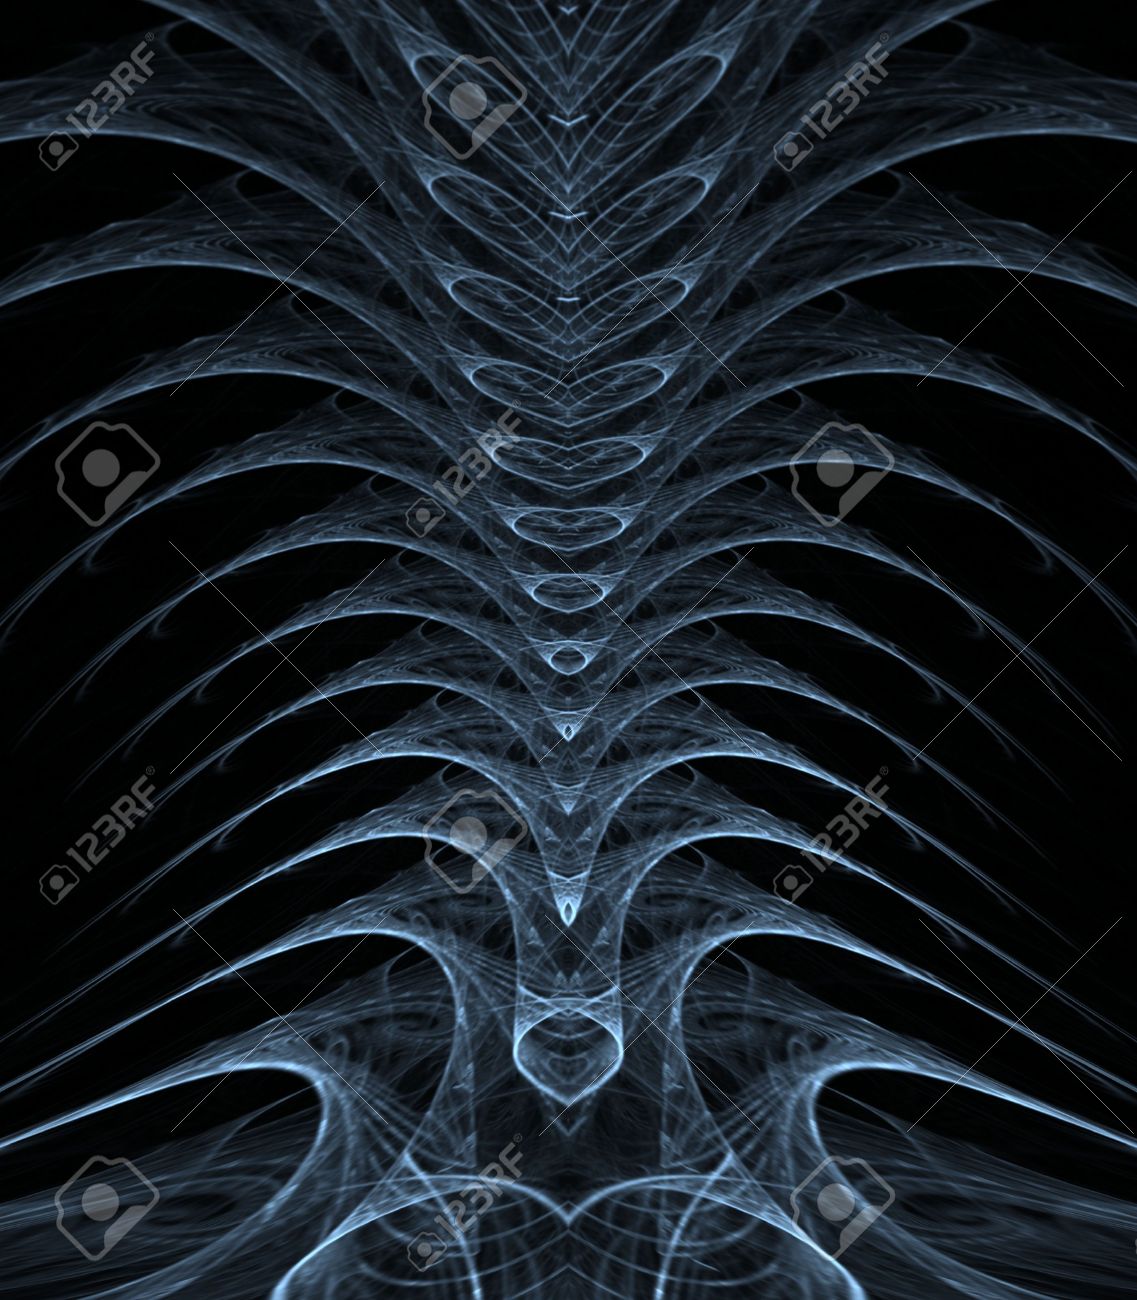 Stacked Spiny Textures In Vertebrae Effect Fractal Abstract